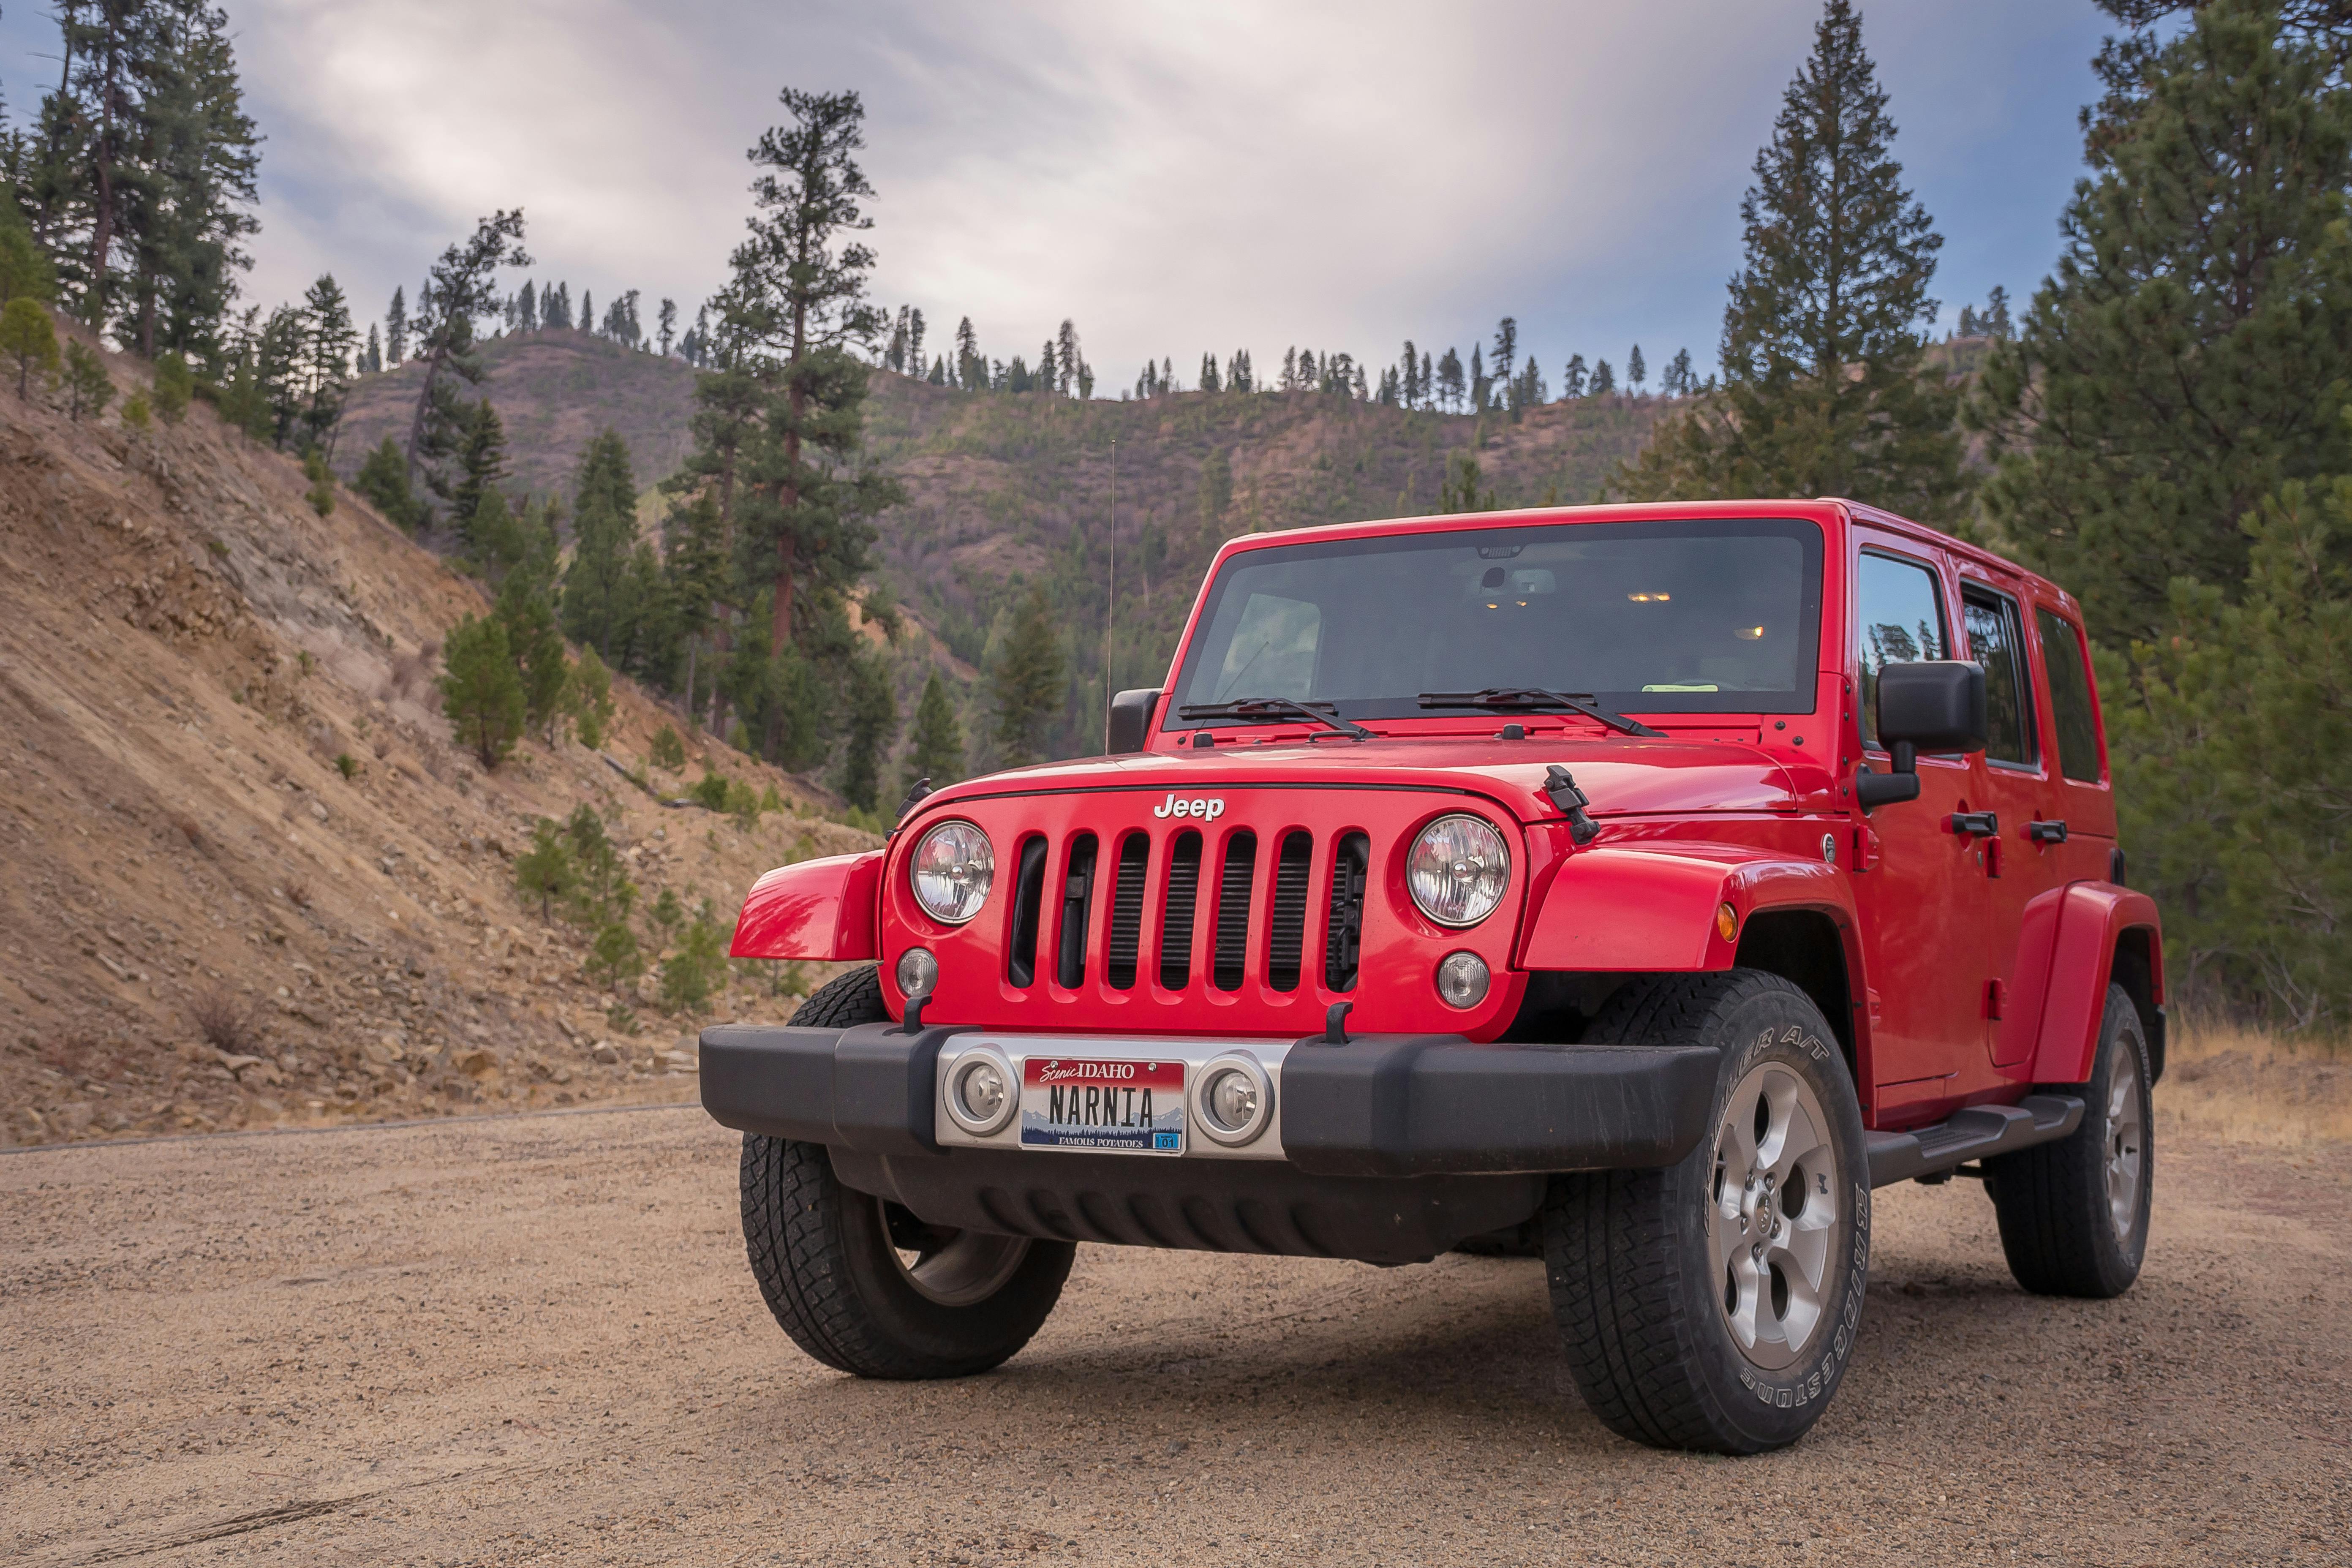 Jeep Photos, Download The BEST Free Jeep Stock Photos & HD Images